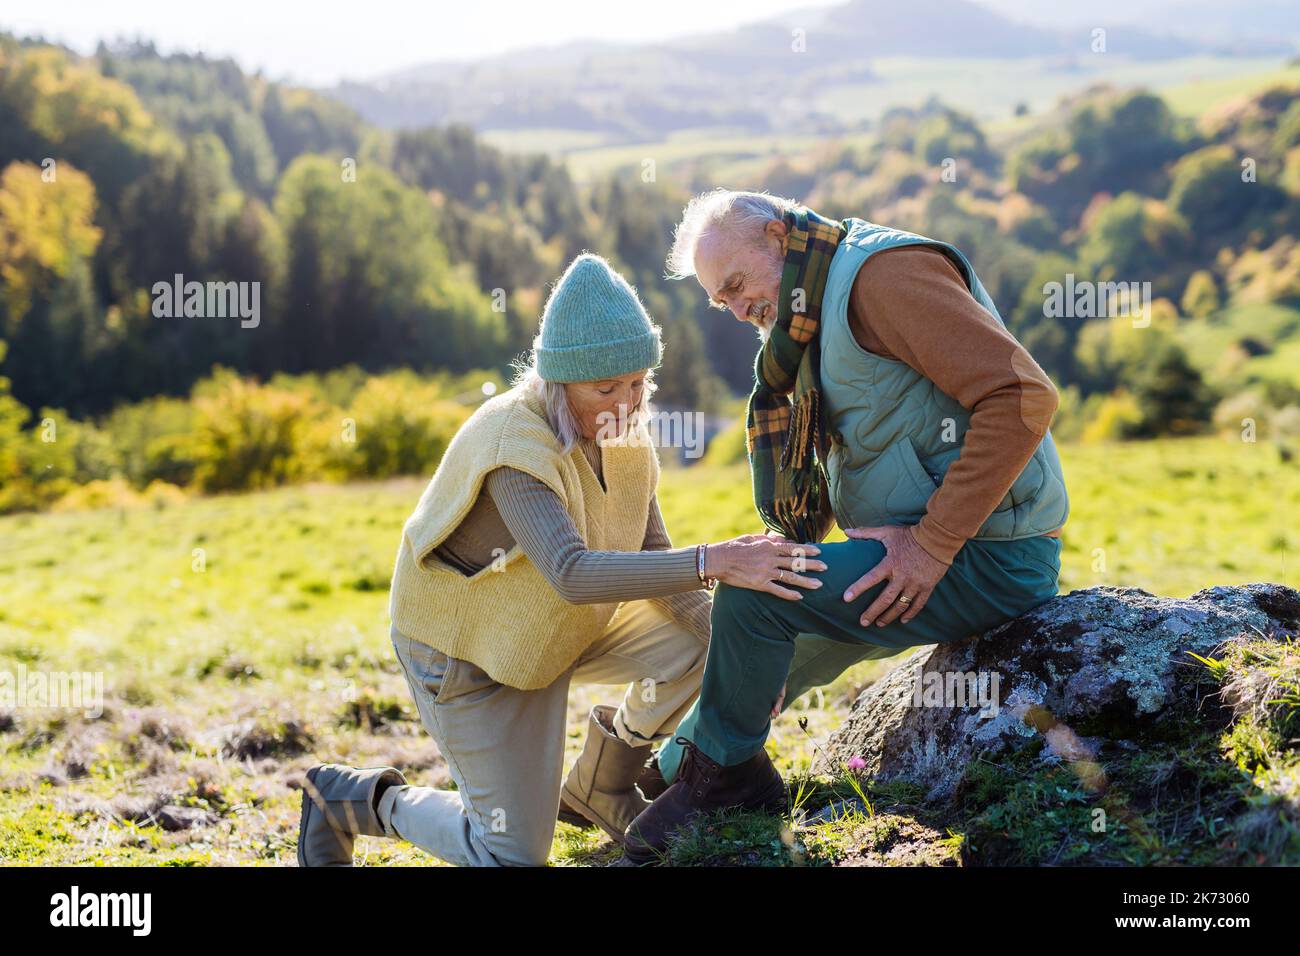 Senior man with hurting knee resting during autumn walk, his wife taking care of him. Stock Photo